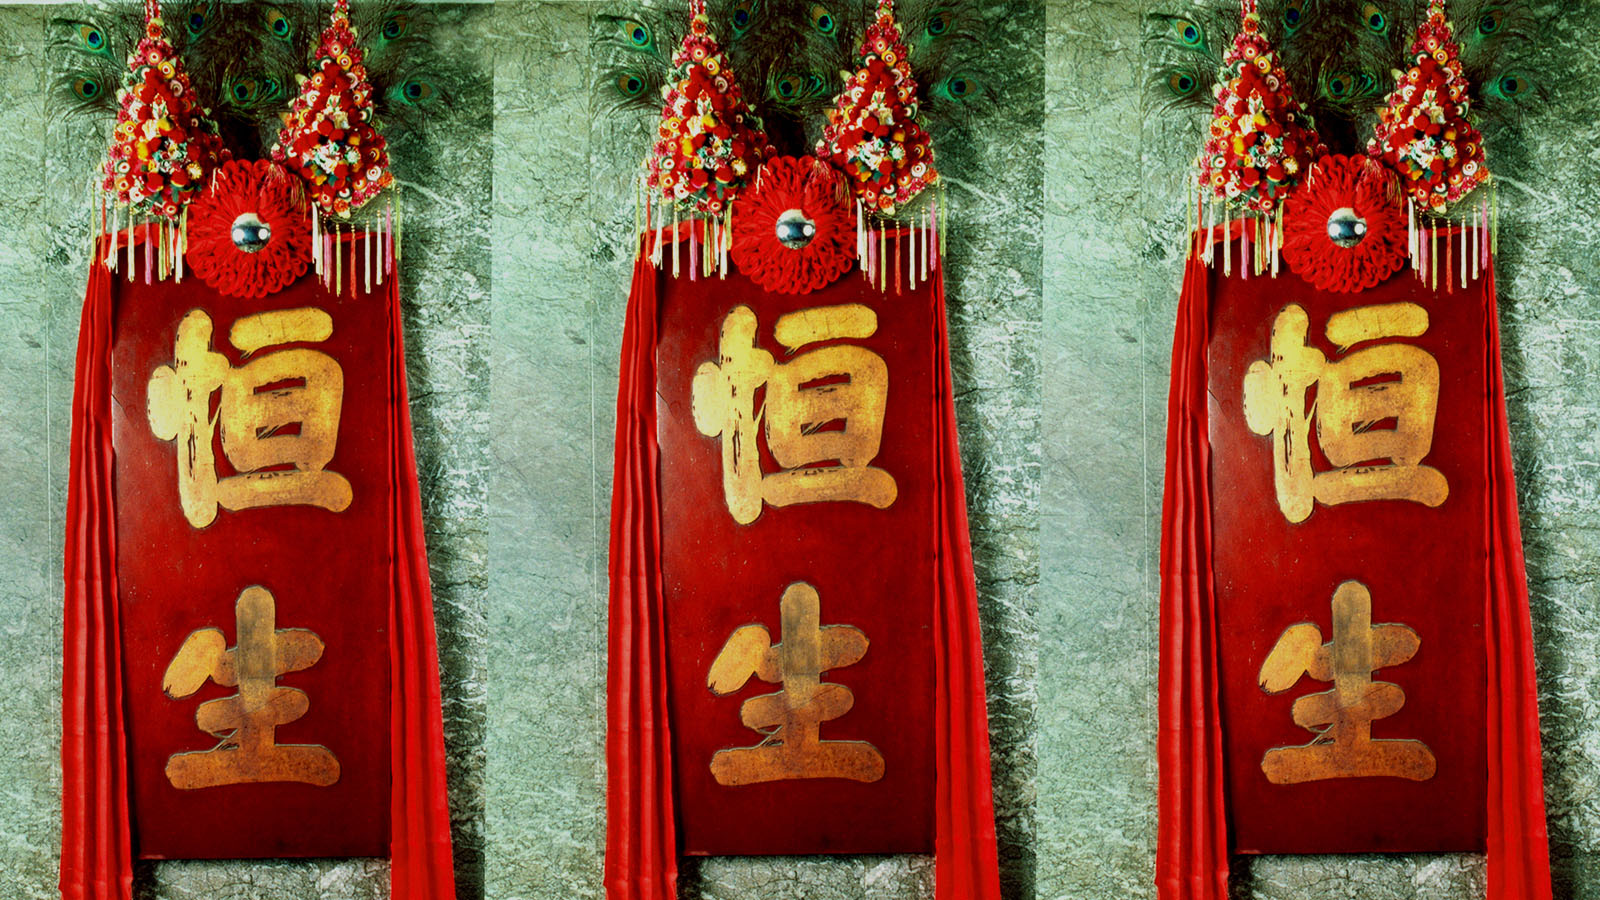 Red and gold wall hangings showing ‘Hang Seng’ in Chinese characters